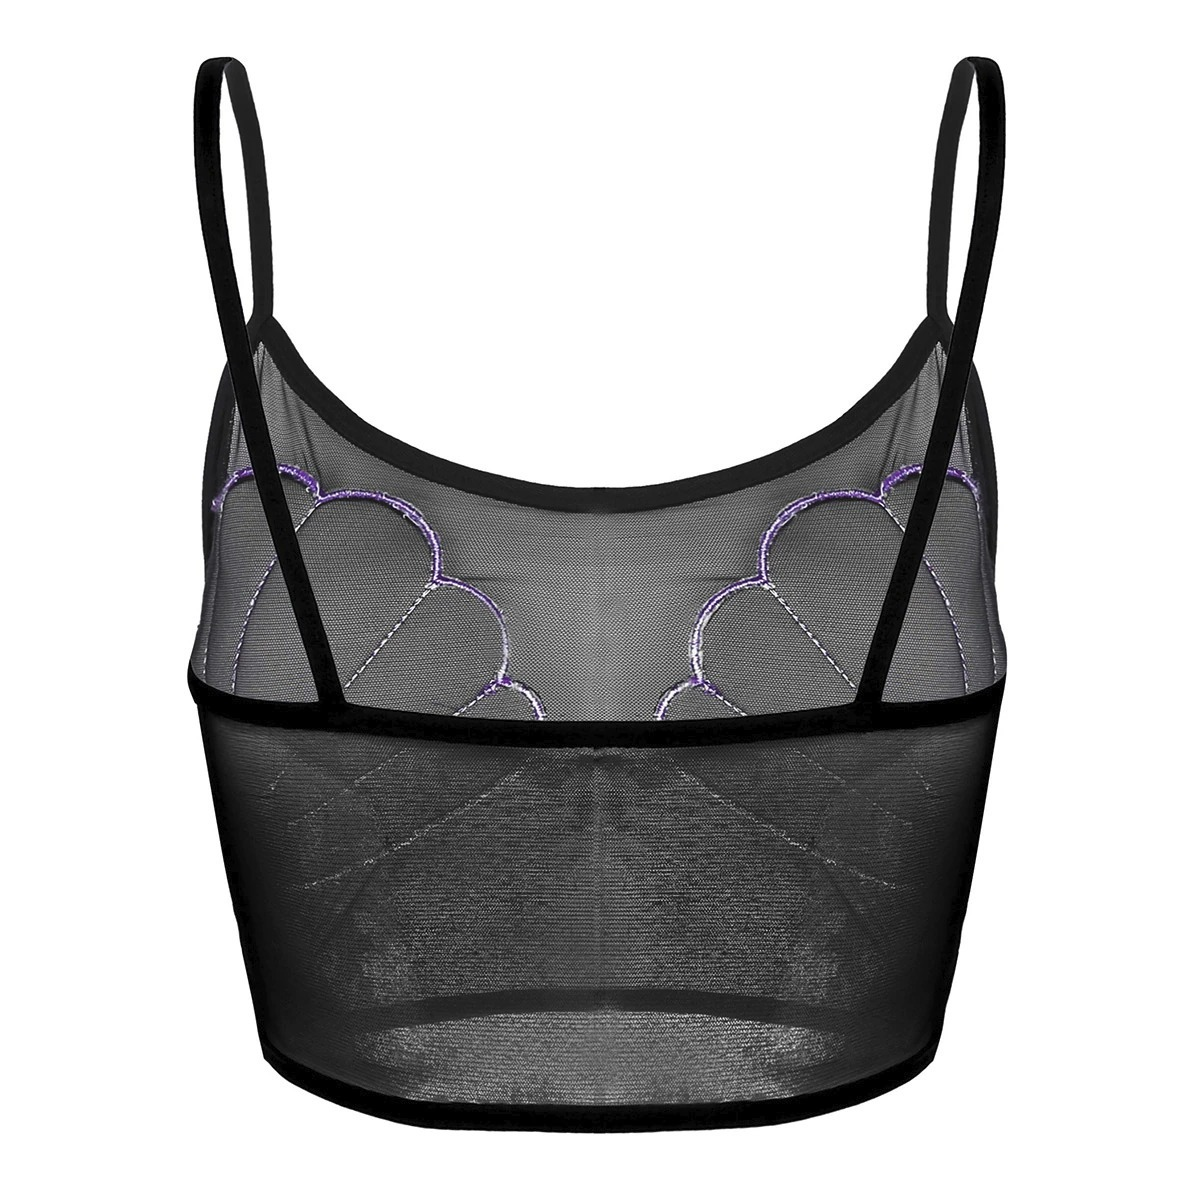 Sexy Women's Crop Top with Shiny Shell / Transparent Mesh Top for Ladies - EVE's SECRETS